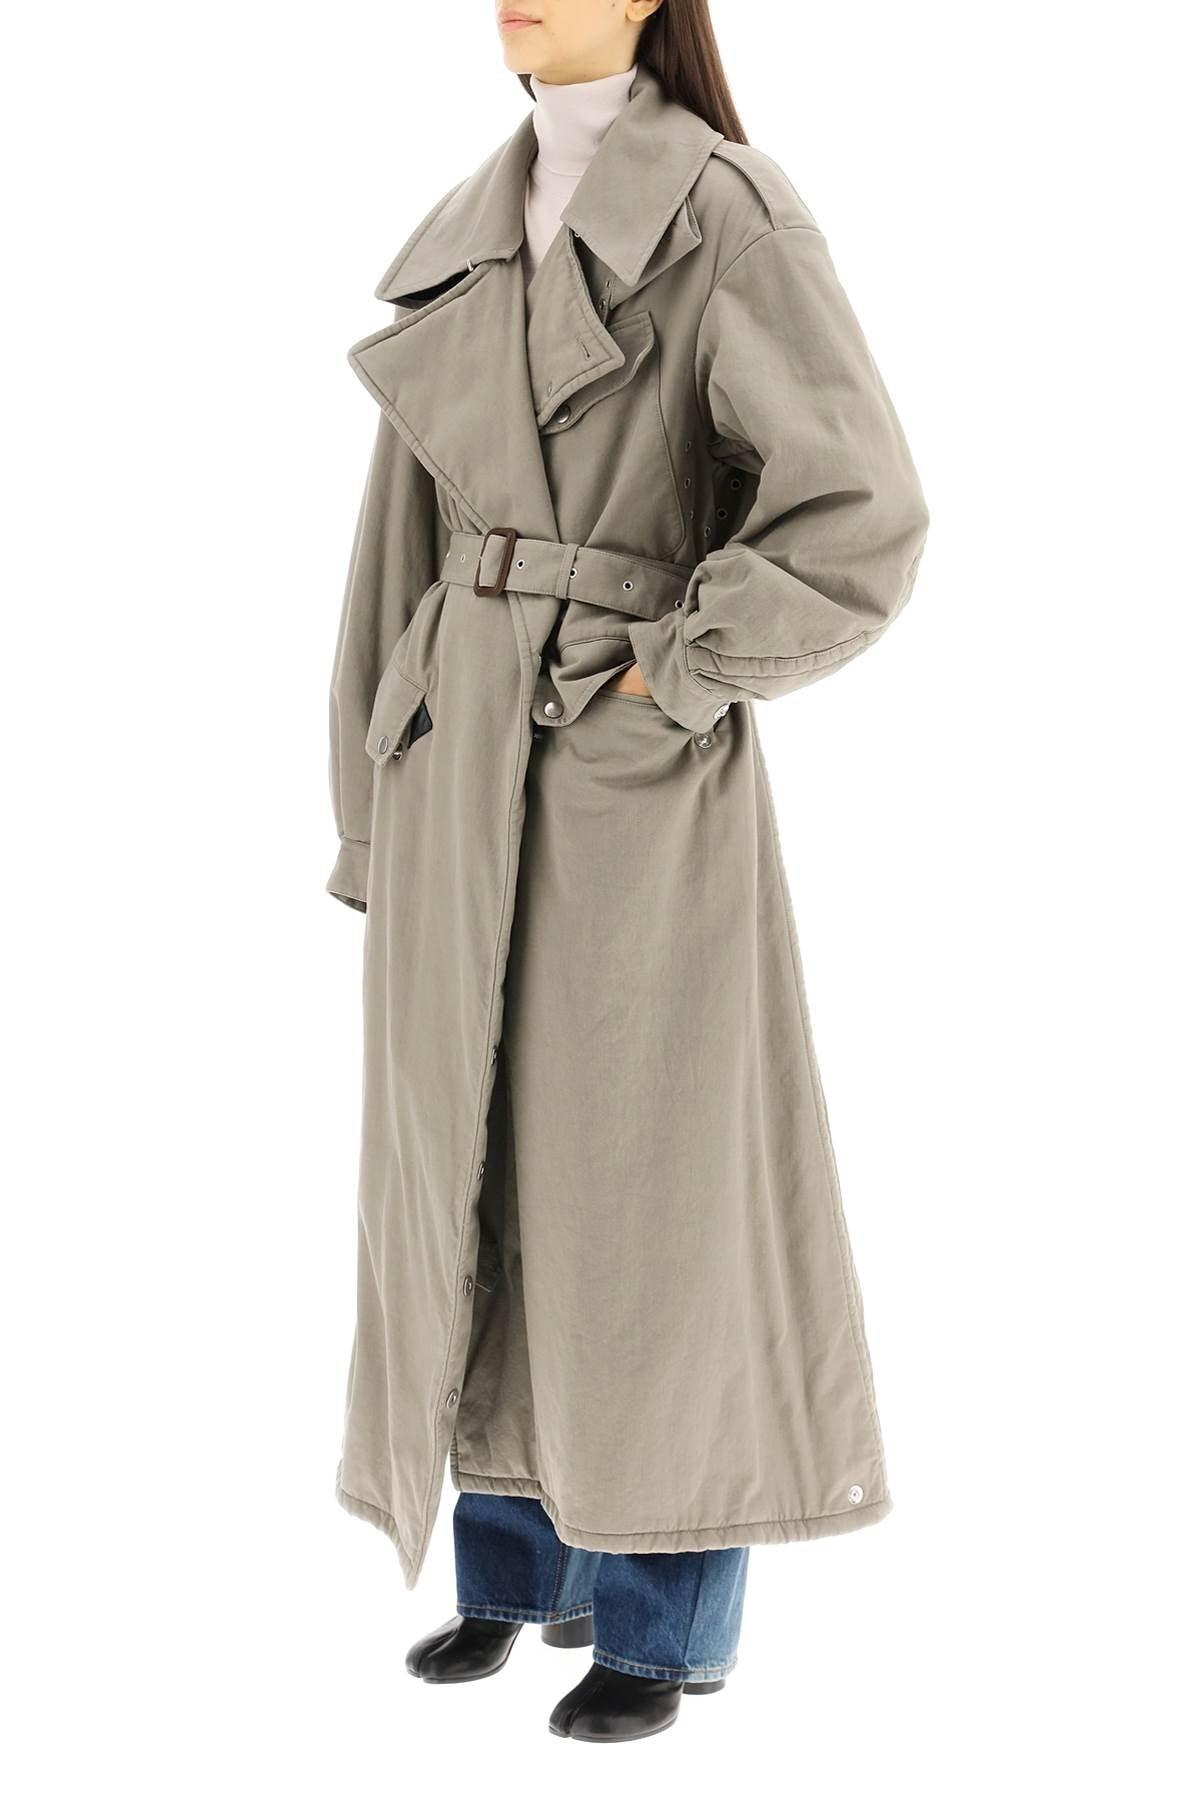 Womens Clothing Coats Raincoats and trench coats - Save 20% Grey Maison Margiela Cashmere Belted Coat in Grey 